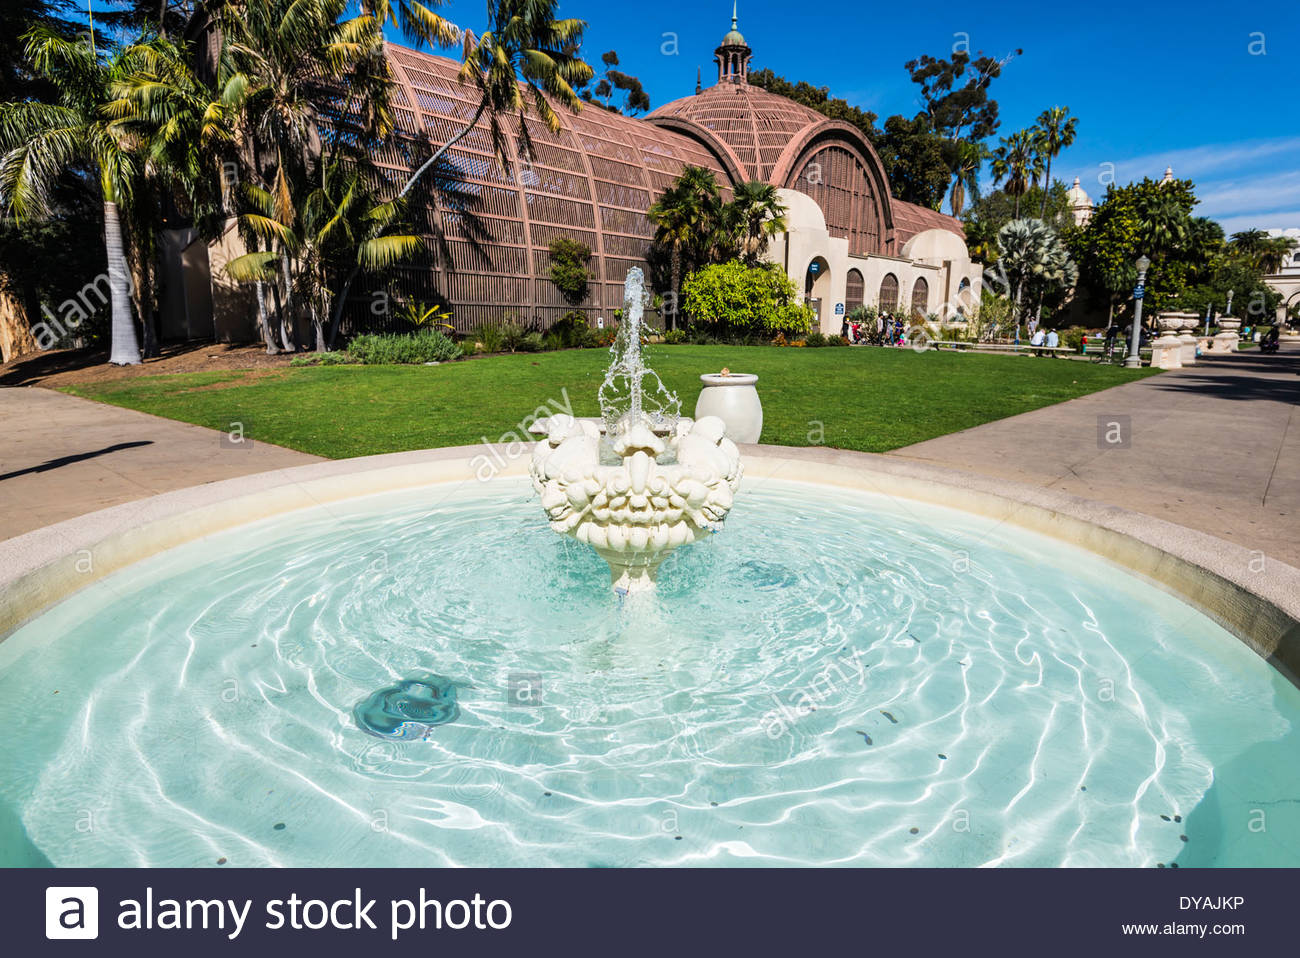 Fountain With The Botanical Building In Background Balboa